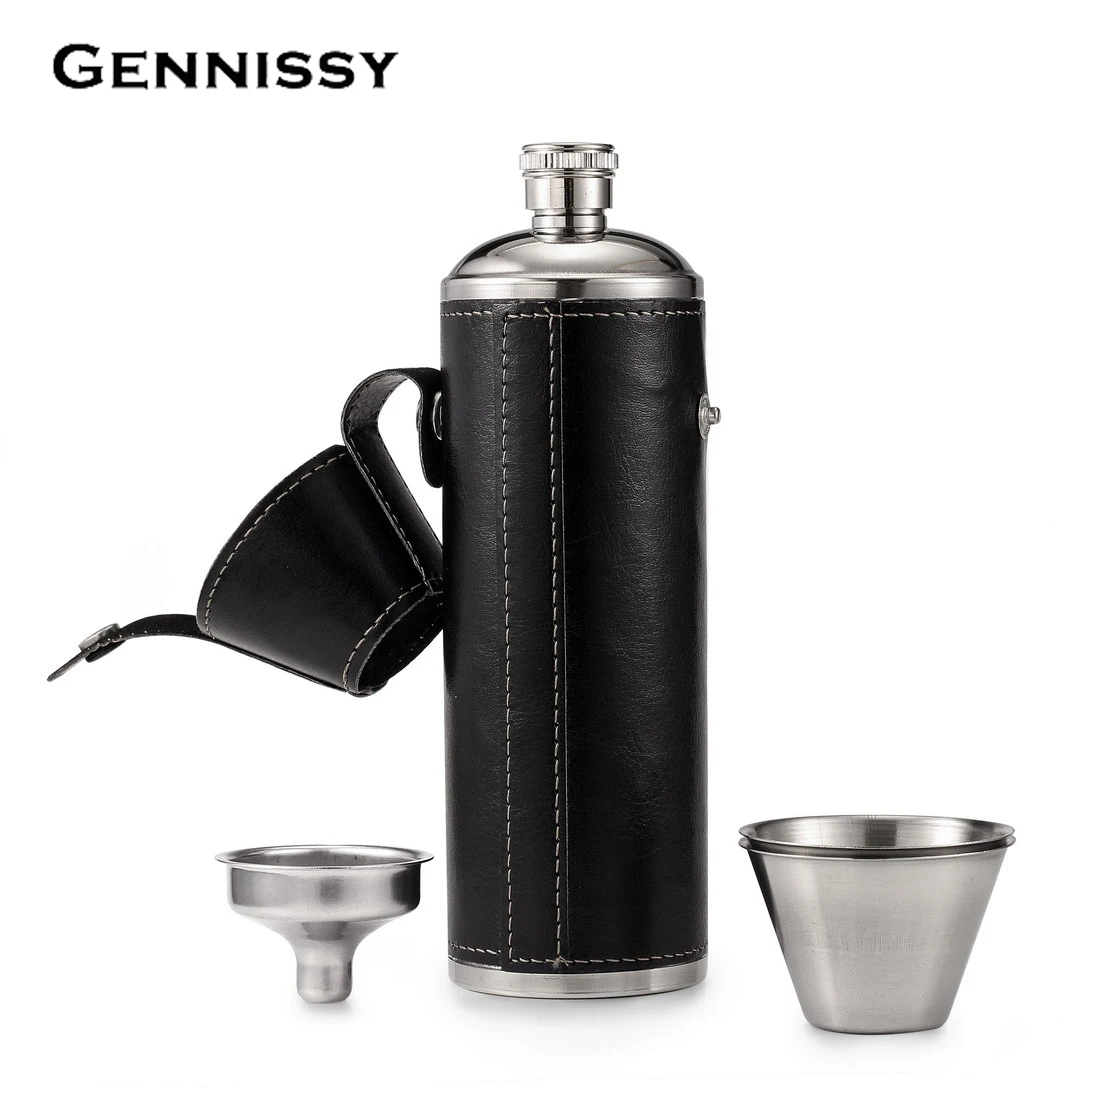 GENNISSY Pocket Hip Flask 10 OZ with Free Funnel + 2 Stainless Steel Cups with Leather Wrapped Cover and 100% Leak Proof Flasks